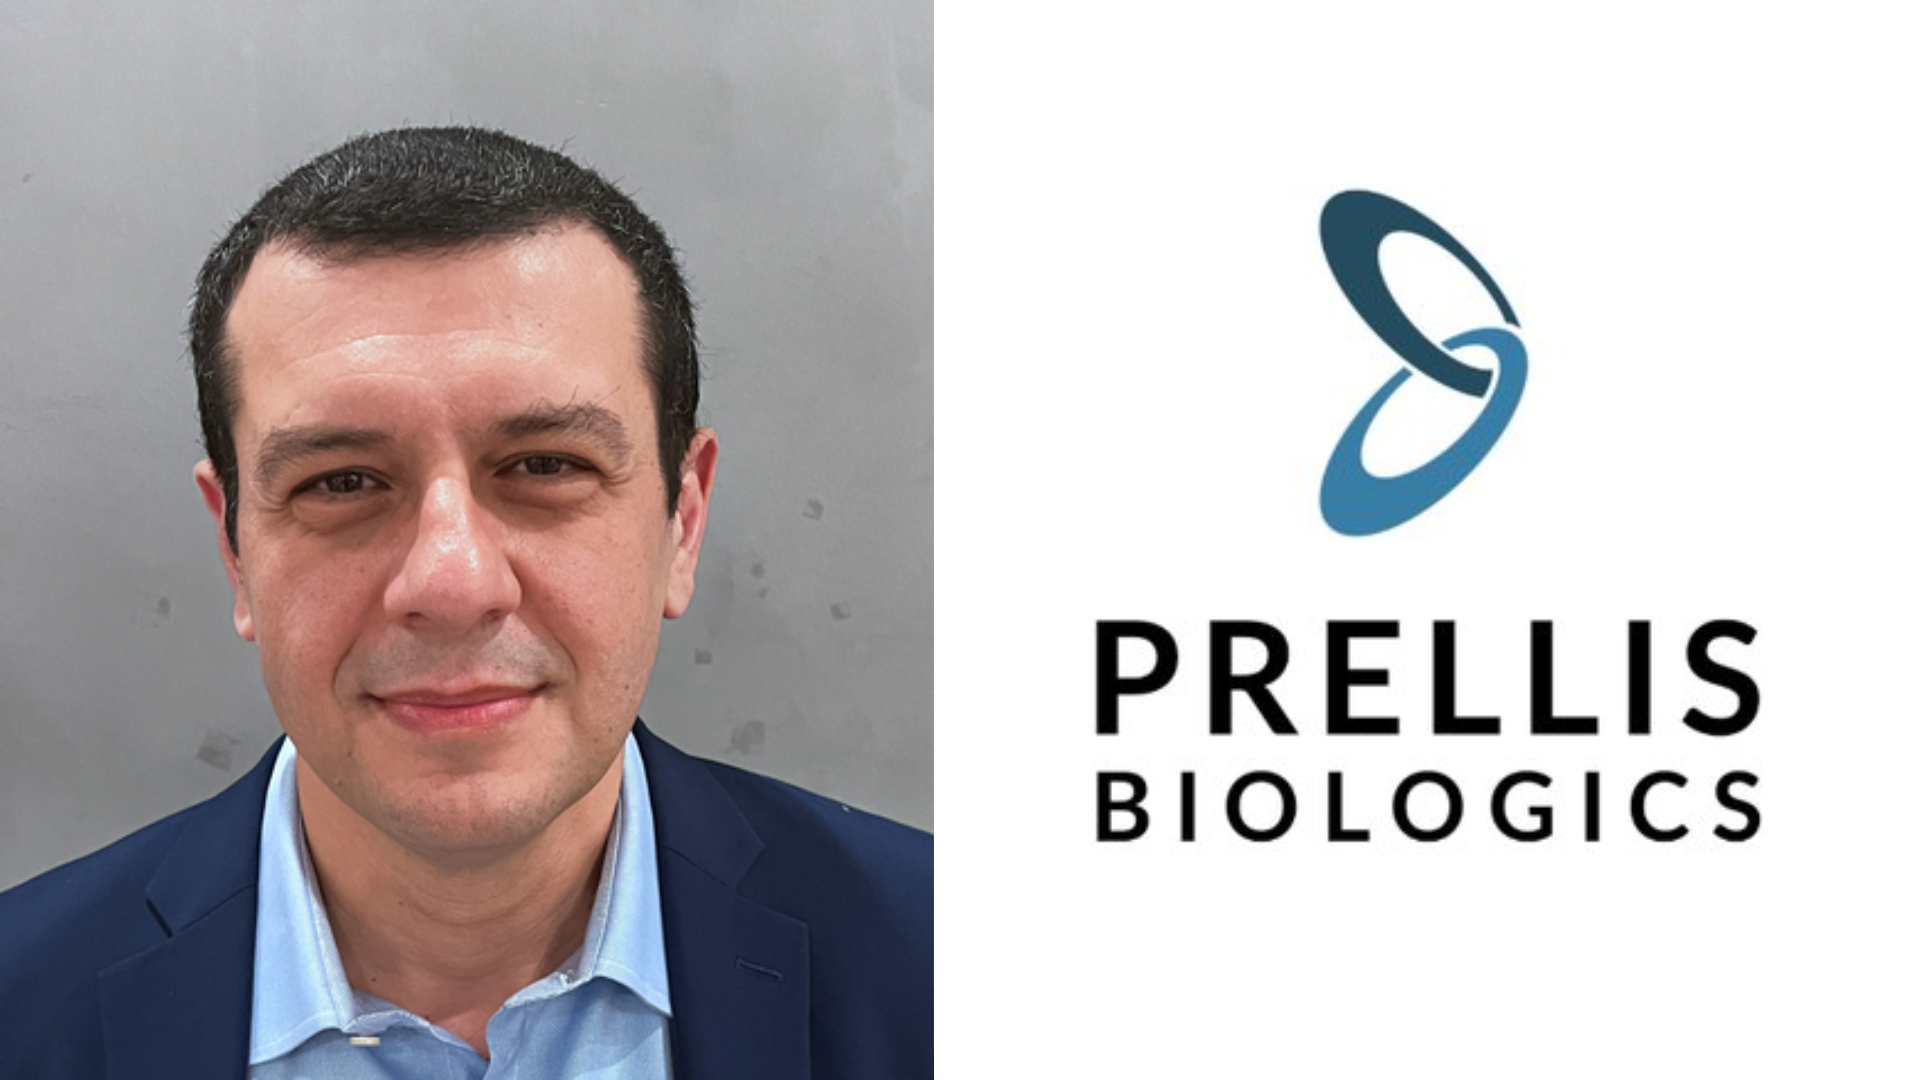 Prellis Biologics appointed Michael Nohaile, PhD as its new CEO. Dr. Nohaile joins from Generate Biomedicines and succeeds Prellis Bio founder Dr. Melanie Matheu, who will assume the role of Chief Technology Officer and retain a Board seat.